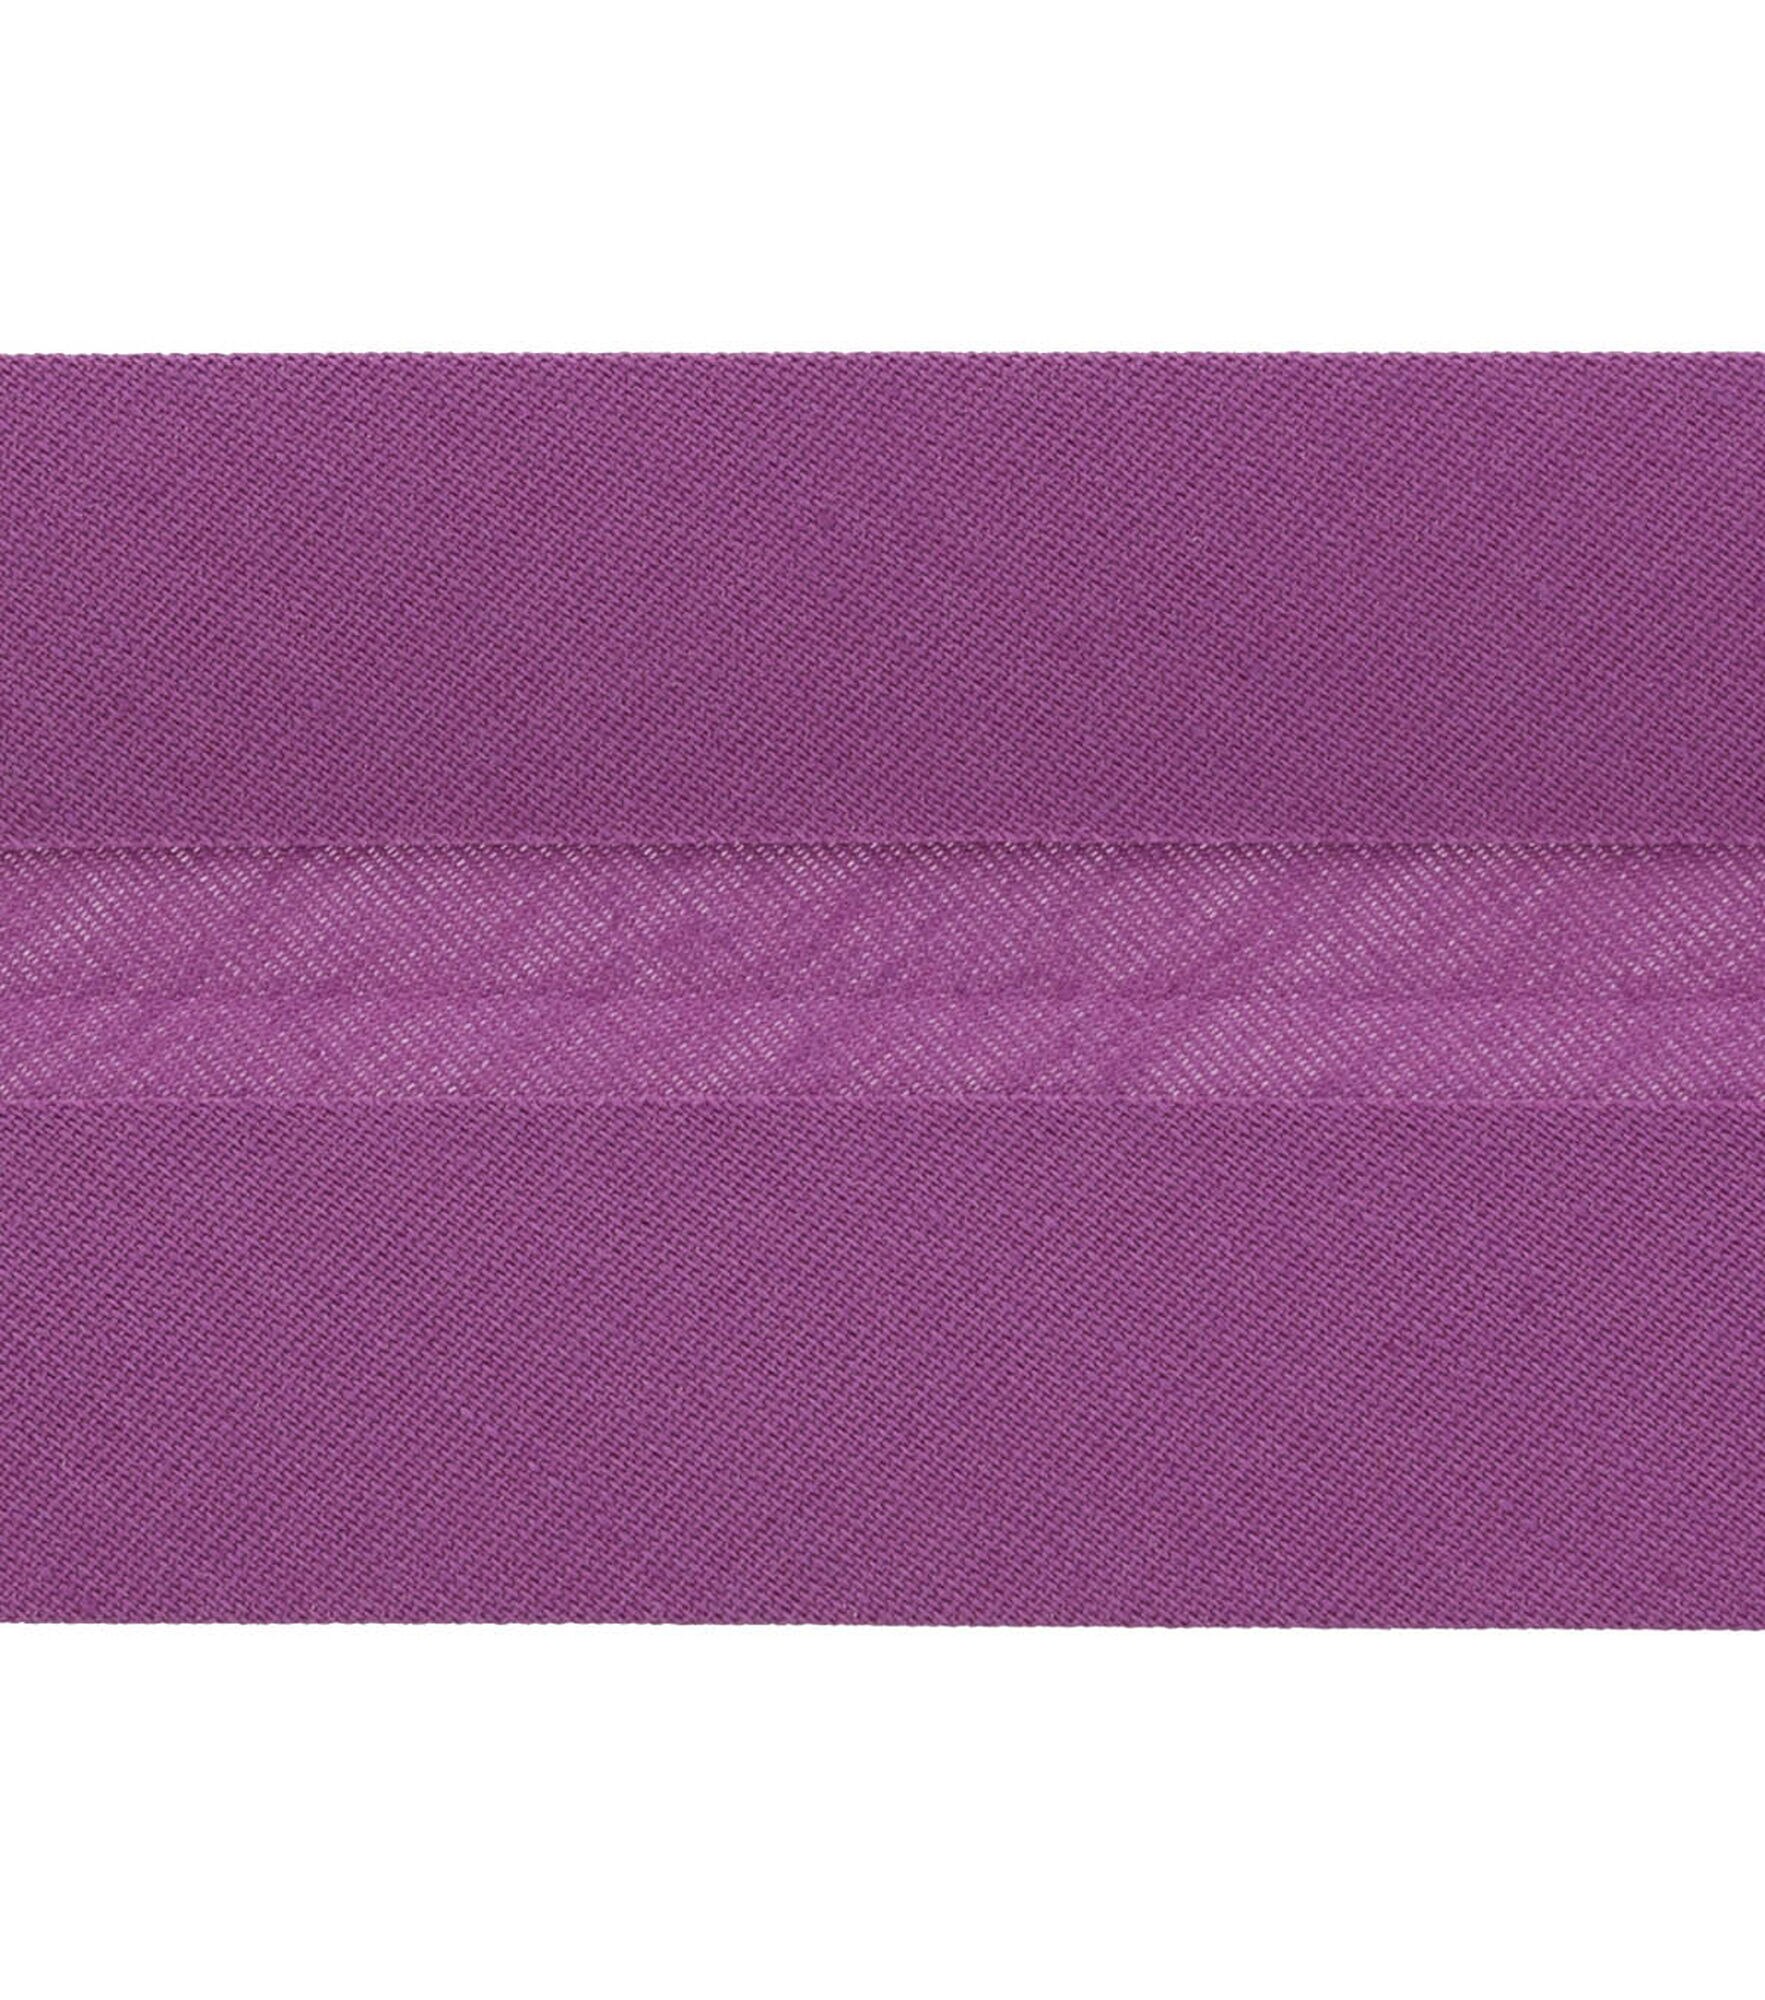 Wrights 7/8" x 3yd Double Fold Quilt Binding, Orchid, hi-res